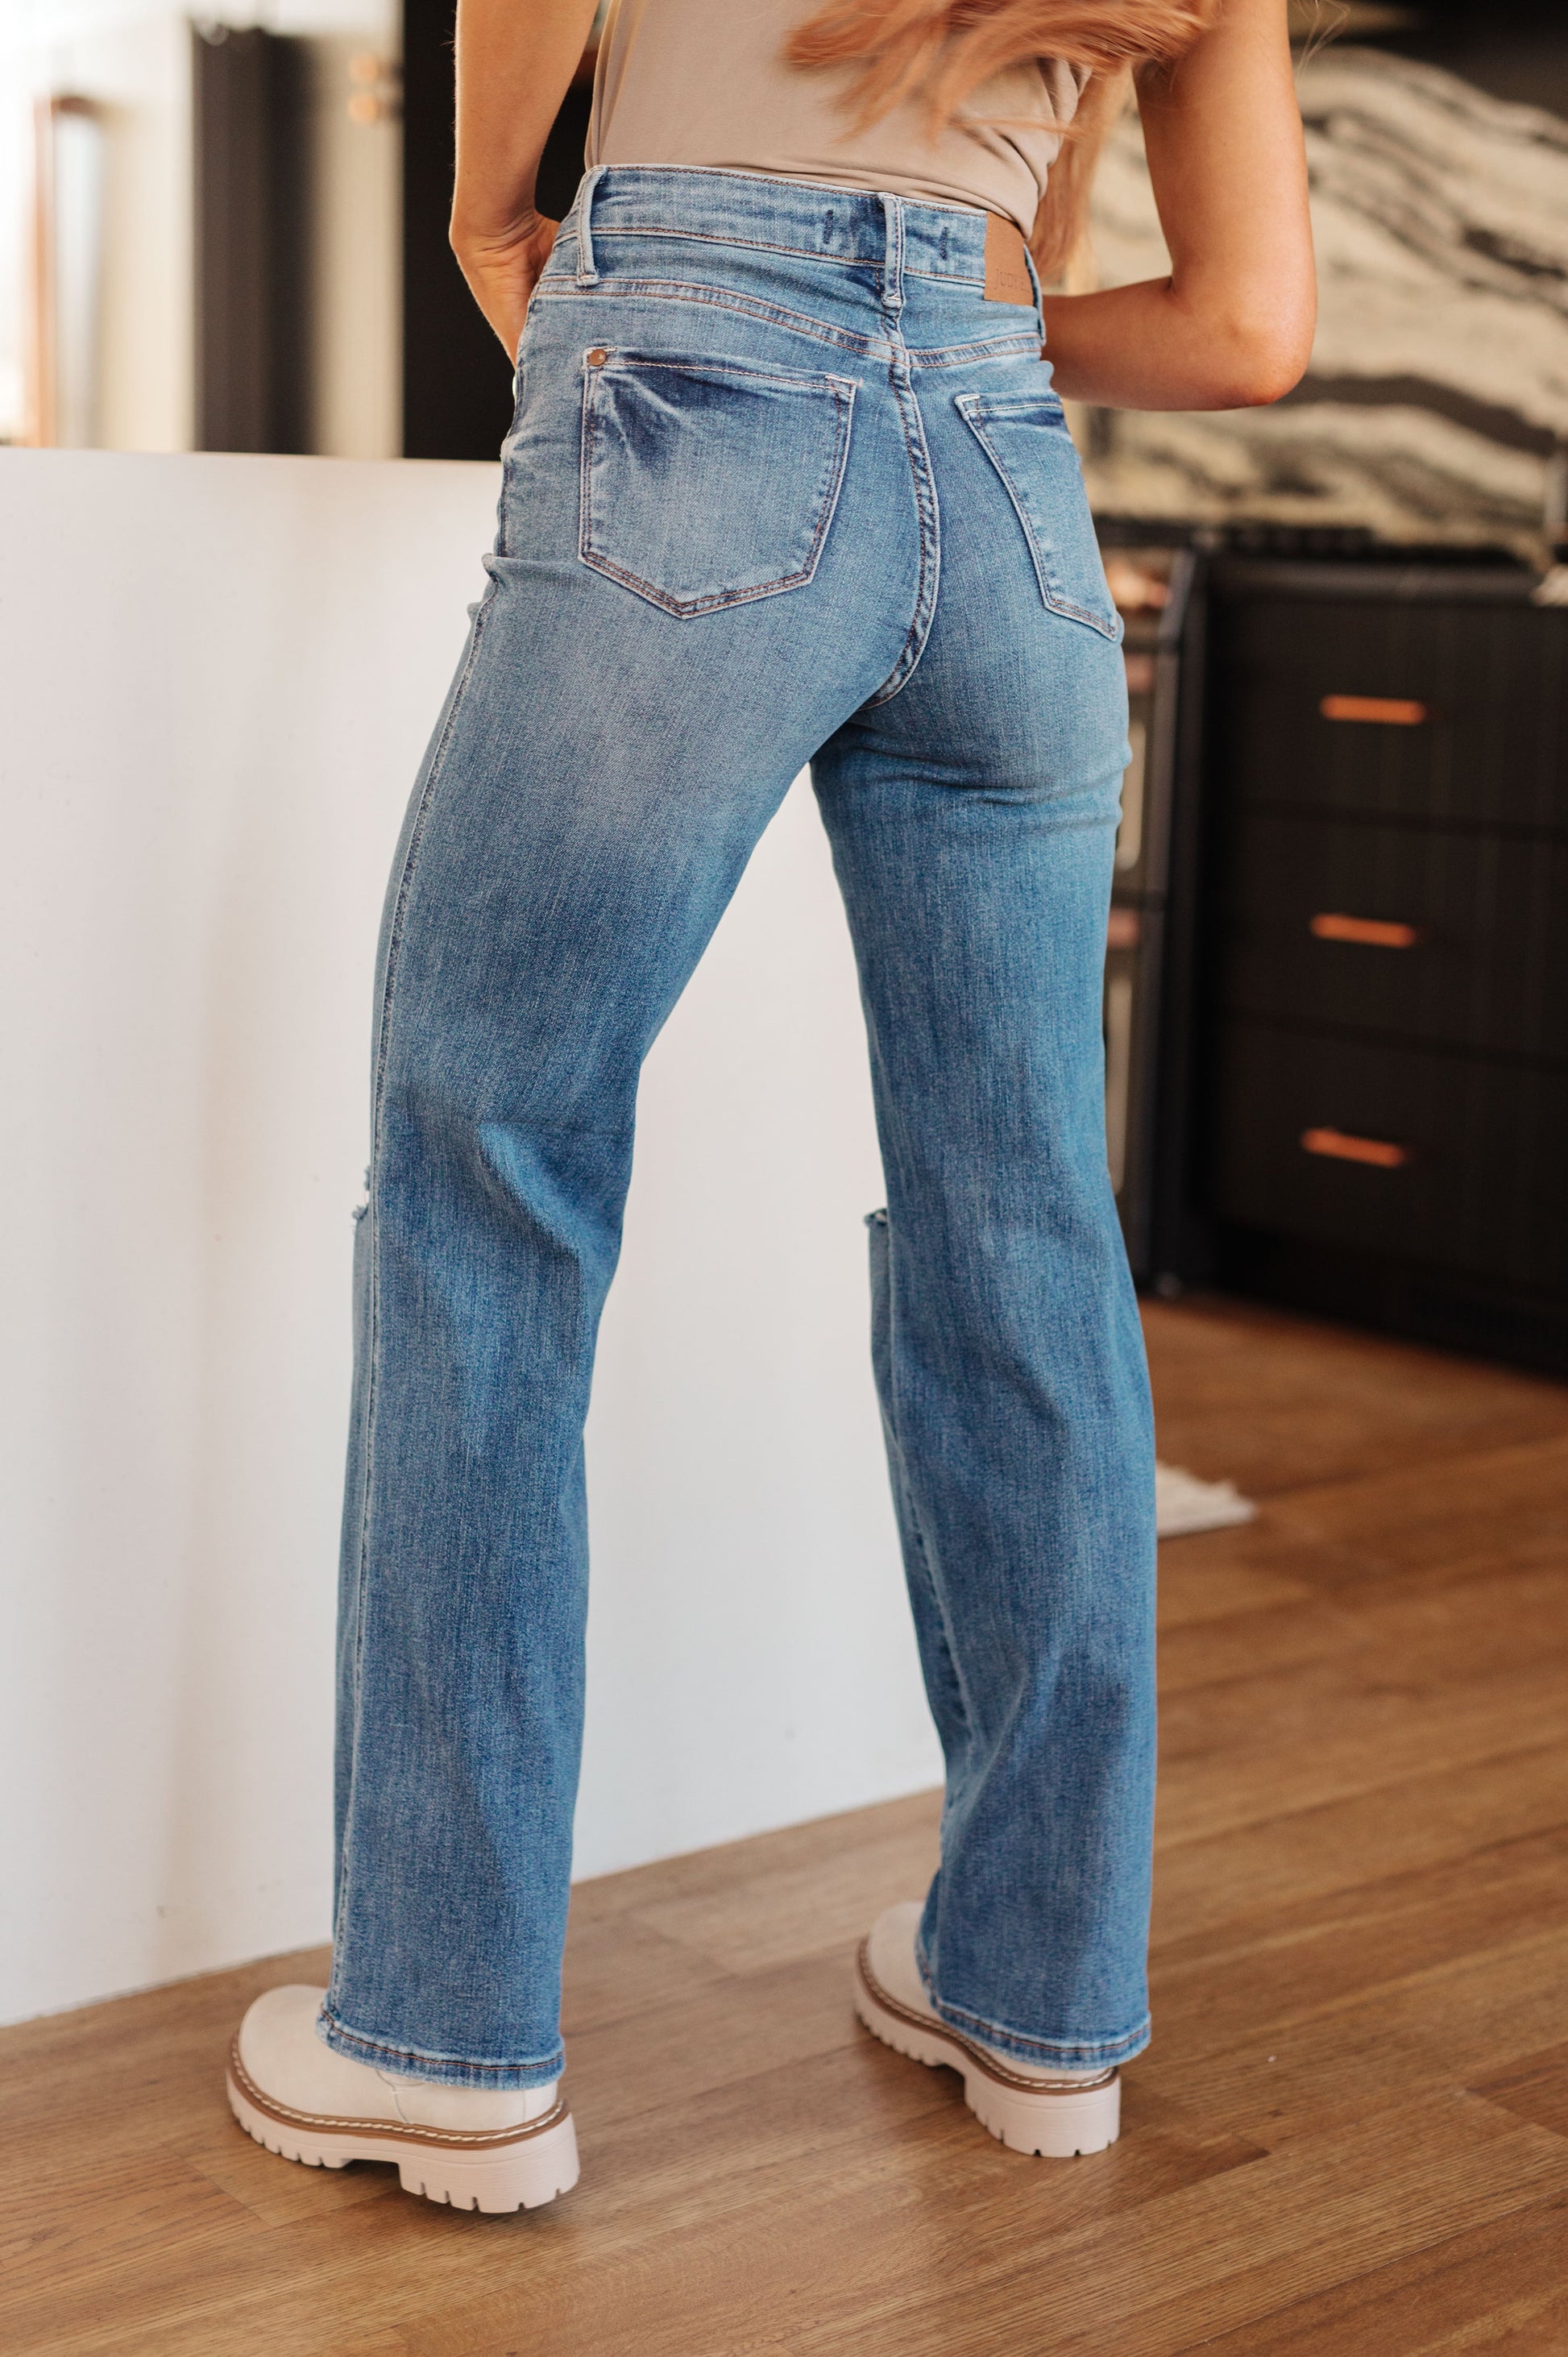 Introducing the Bree High Rise Control Top Distressed Straight Jeans from Judy Blue - the perfect blend of fashion and function. With a flattering high rise and tummy control technology, these jeans will give you a confidence boost. The distressed details and medium wash add an edgy touch to the classic straight silhouette.  0 -24W